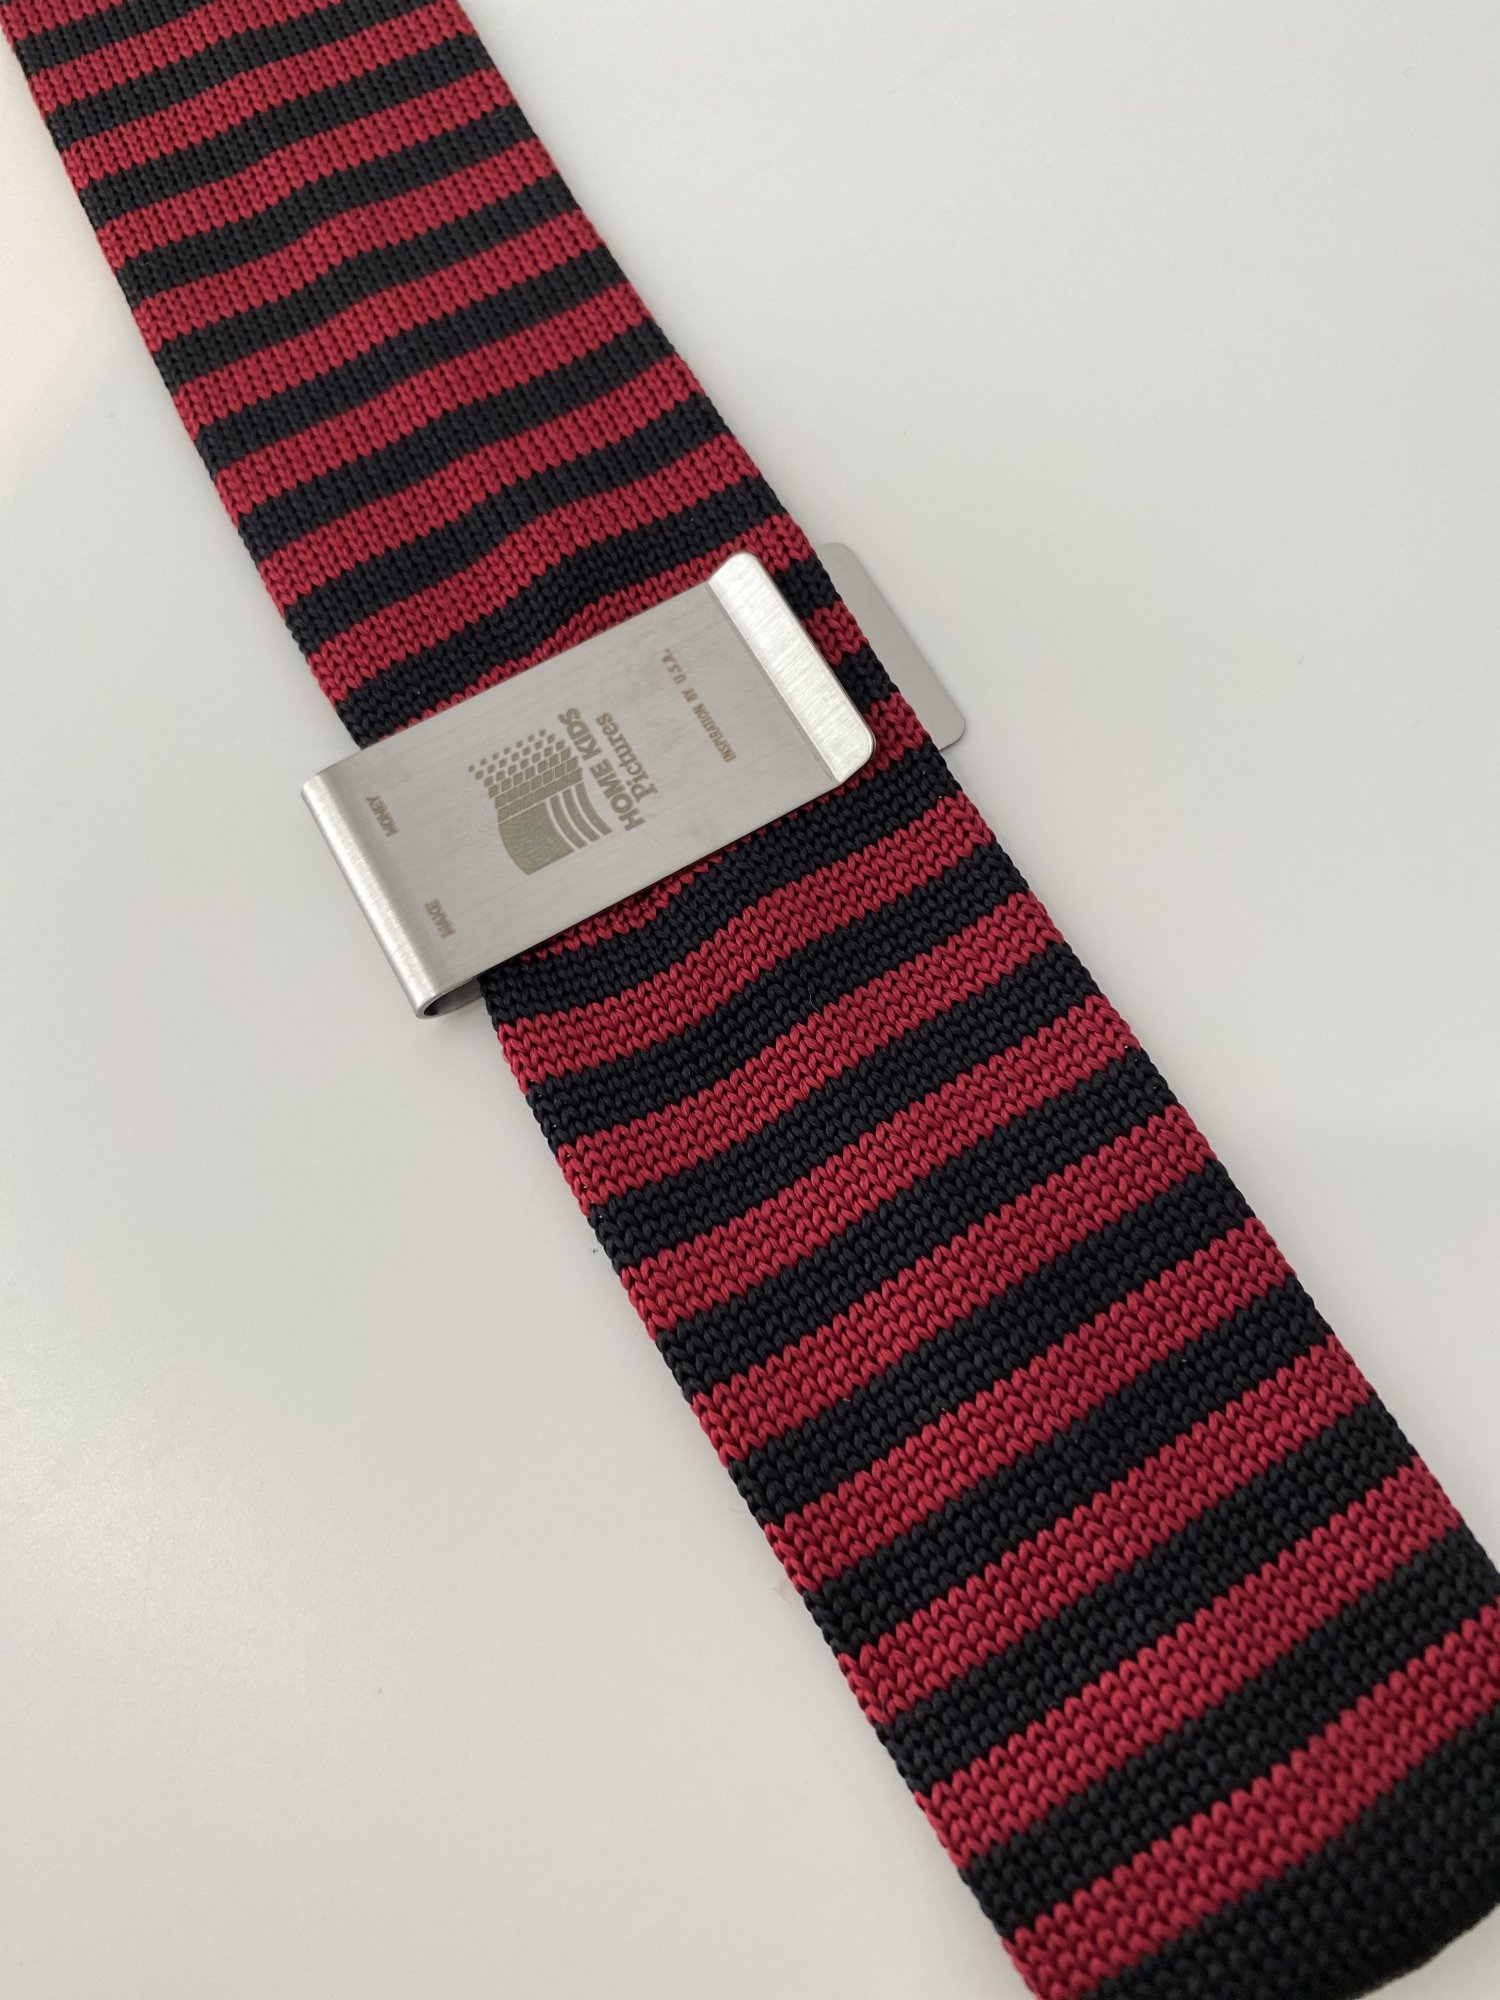 DAIRIKU<br />Boder Silk Knit Tie / Red<img class='new_mark_img2' src='https://img.shop-pro.jp/img/new/icons14.gif' style='border:none;display:inline;margin:0px;padding:0px;width:auto;' />